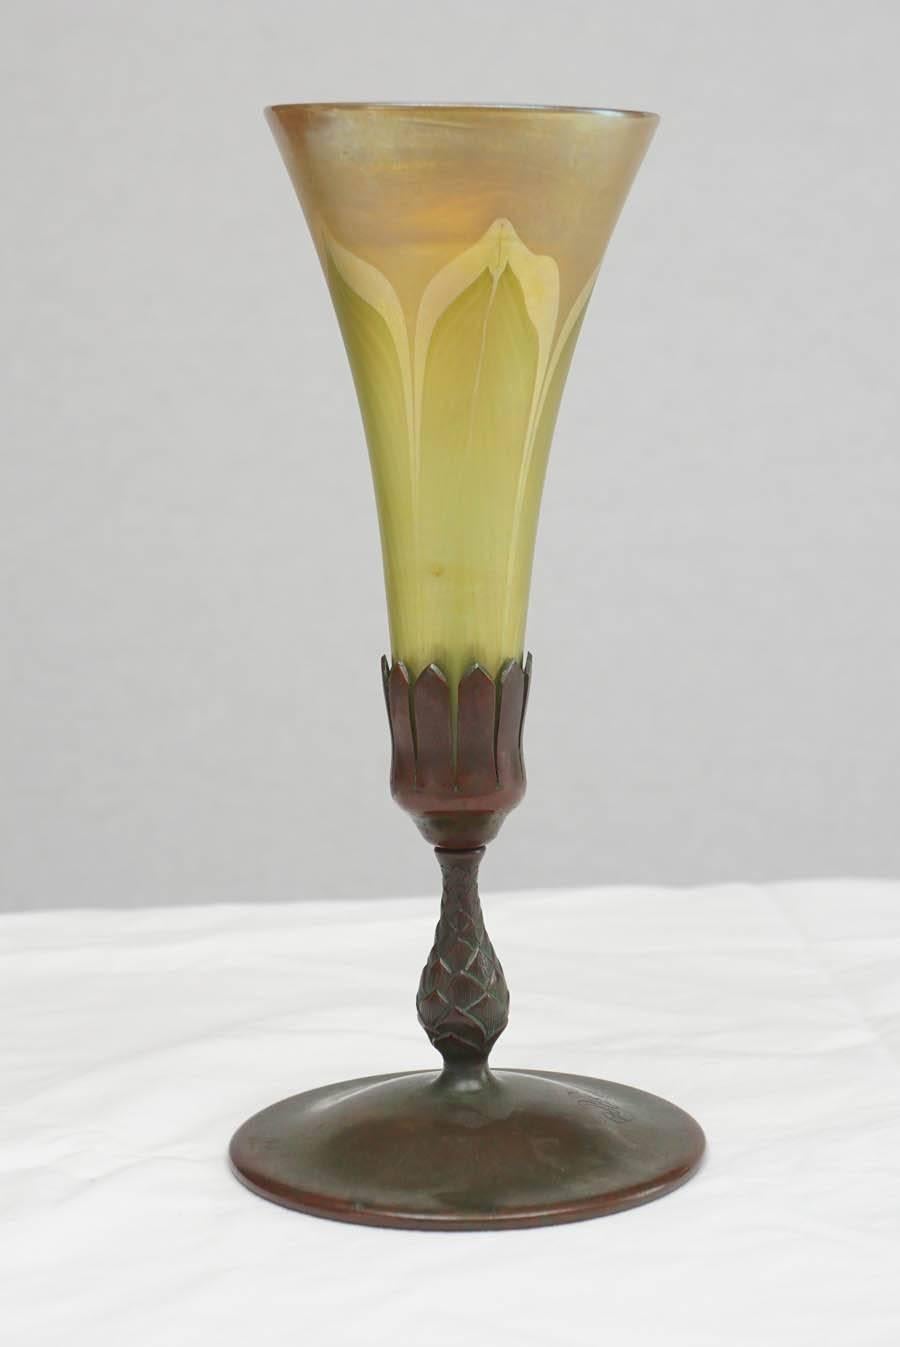 Stunning color on this early 20th century favrile glass vase by Louis Comfort Tiffany. The base is well marked and monogrammed.